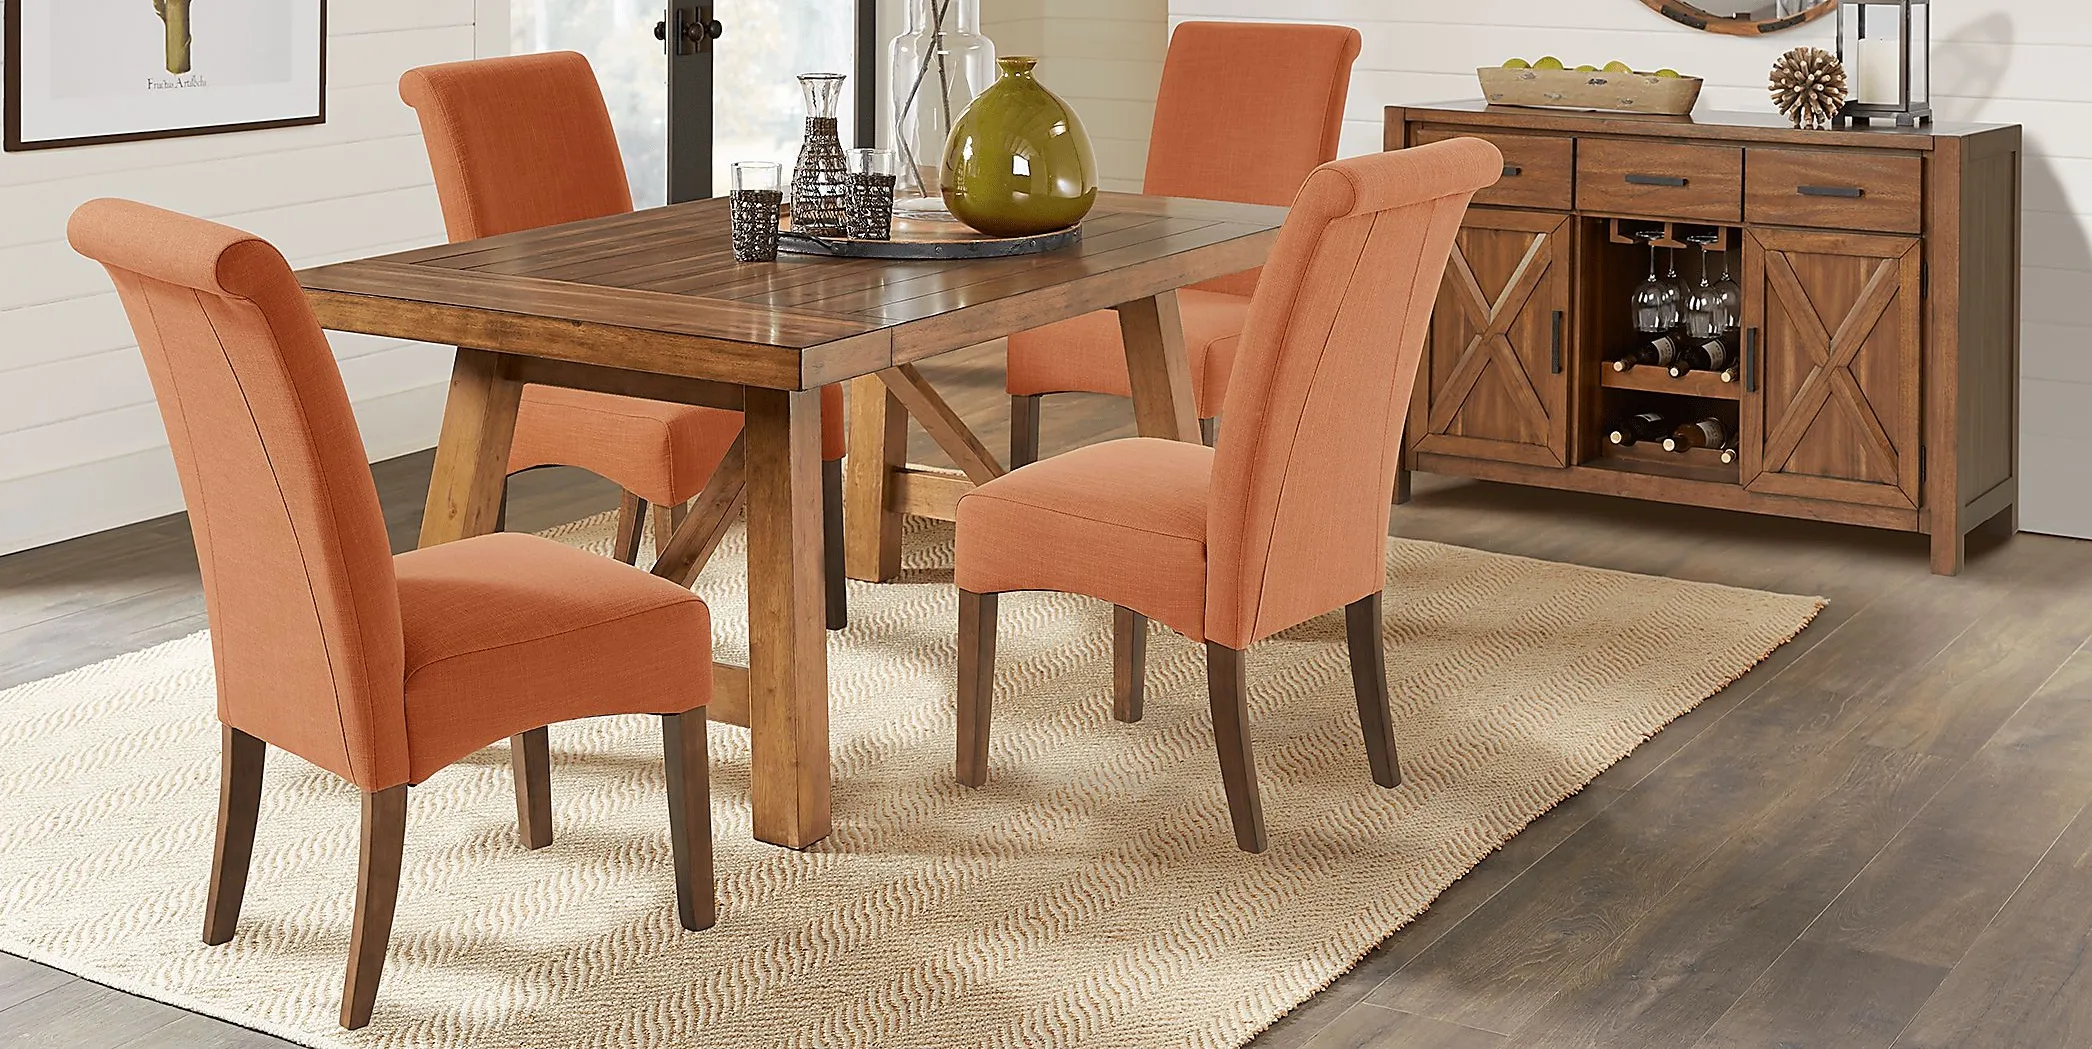 Acorn Cottage Brown 5 Pc Dining Room with Orange Chairs